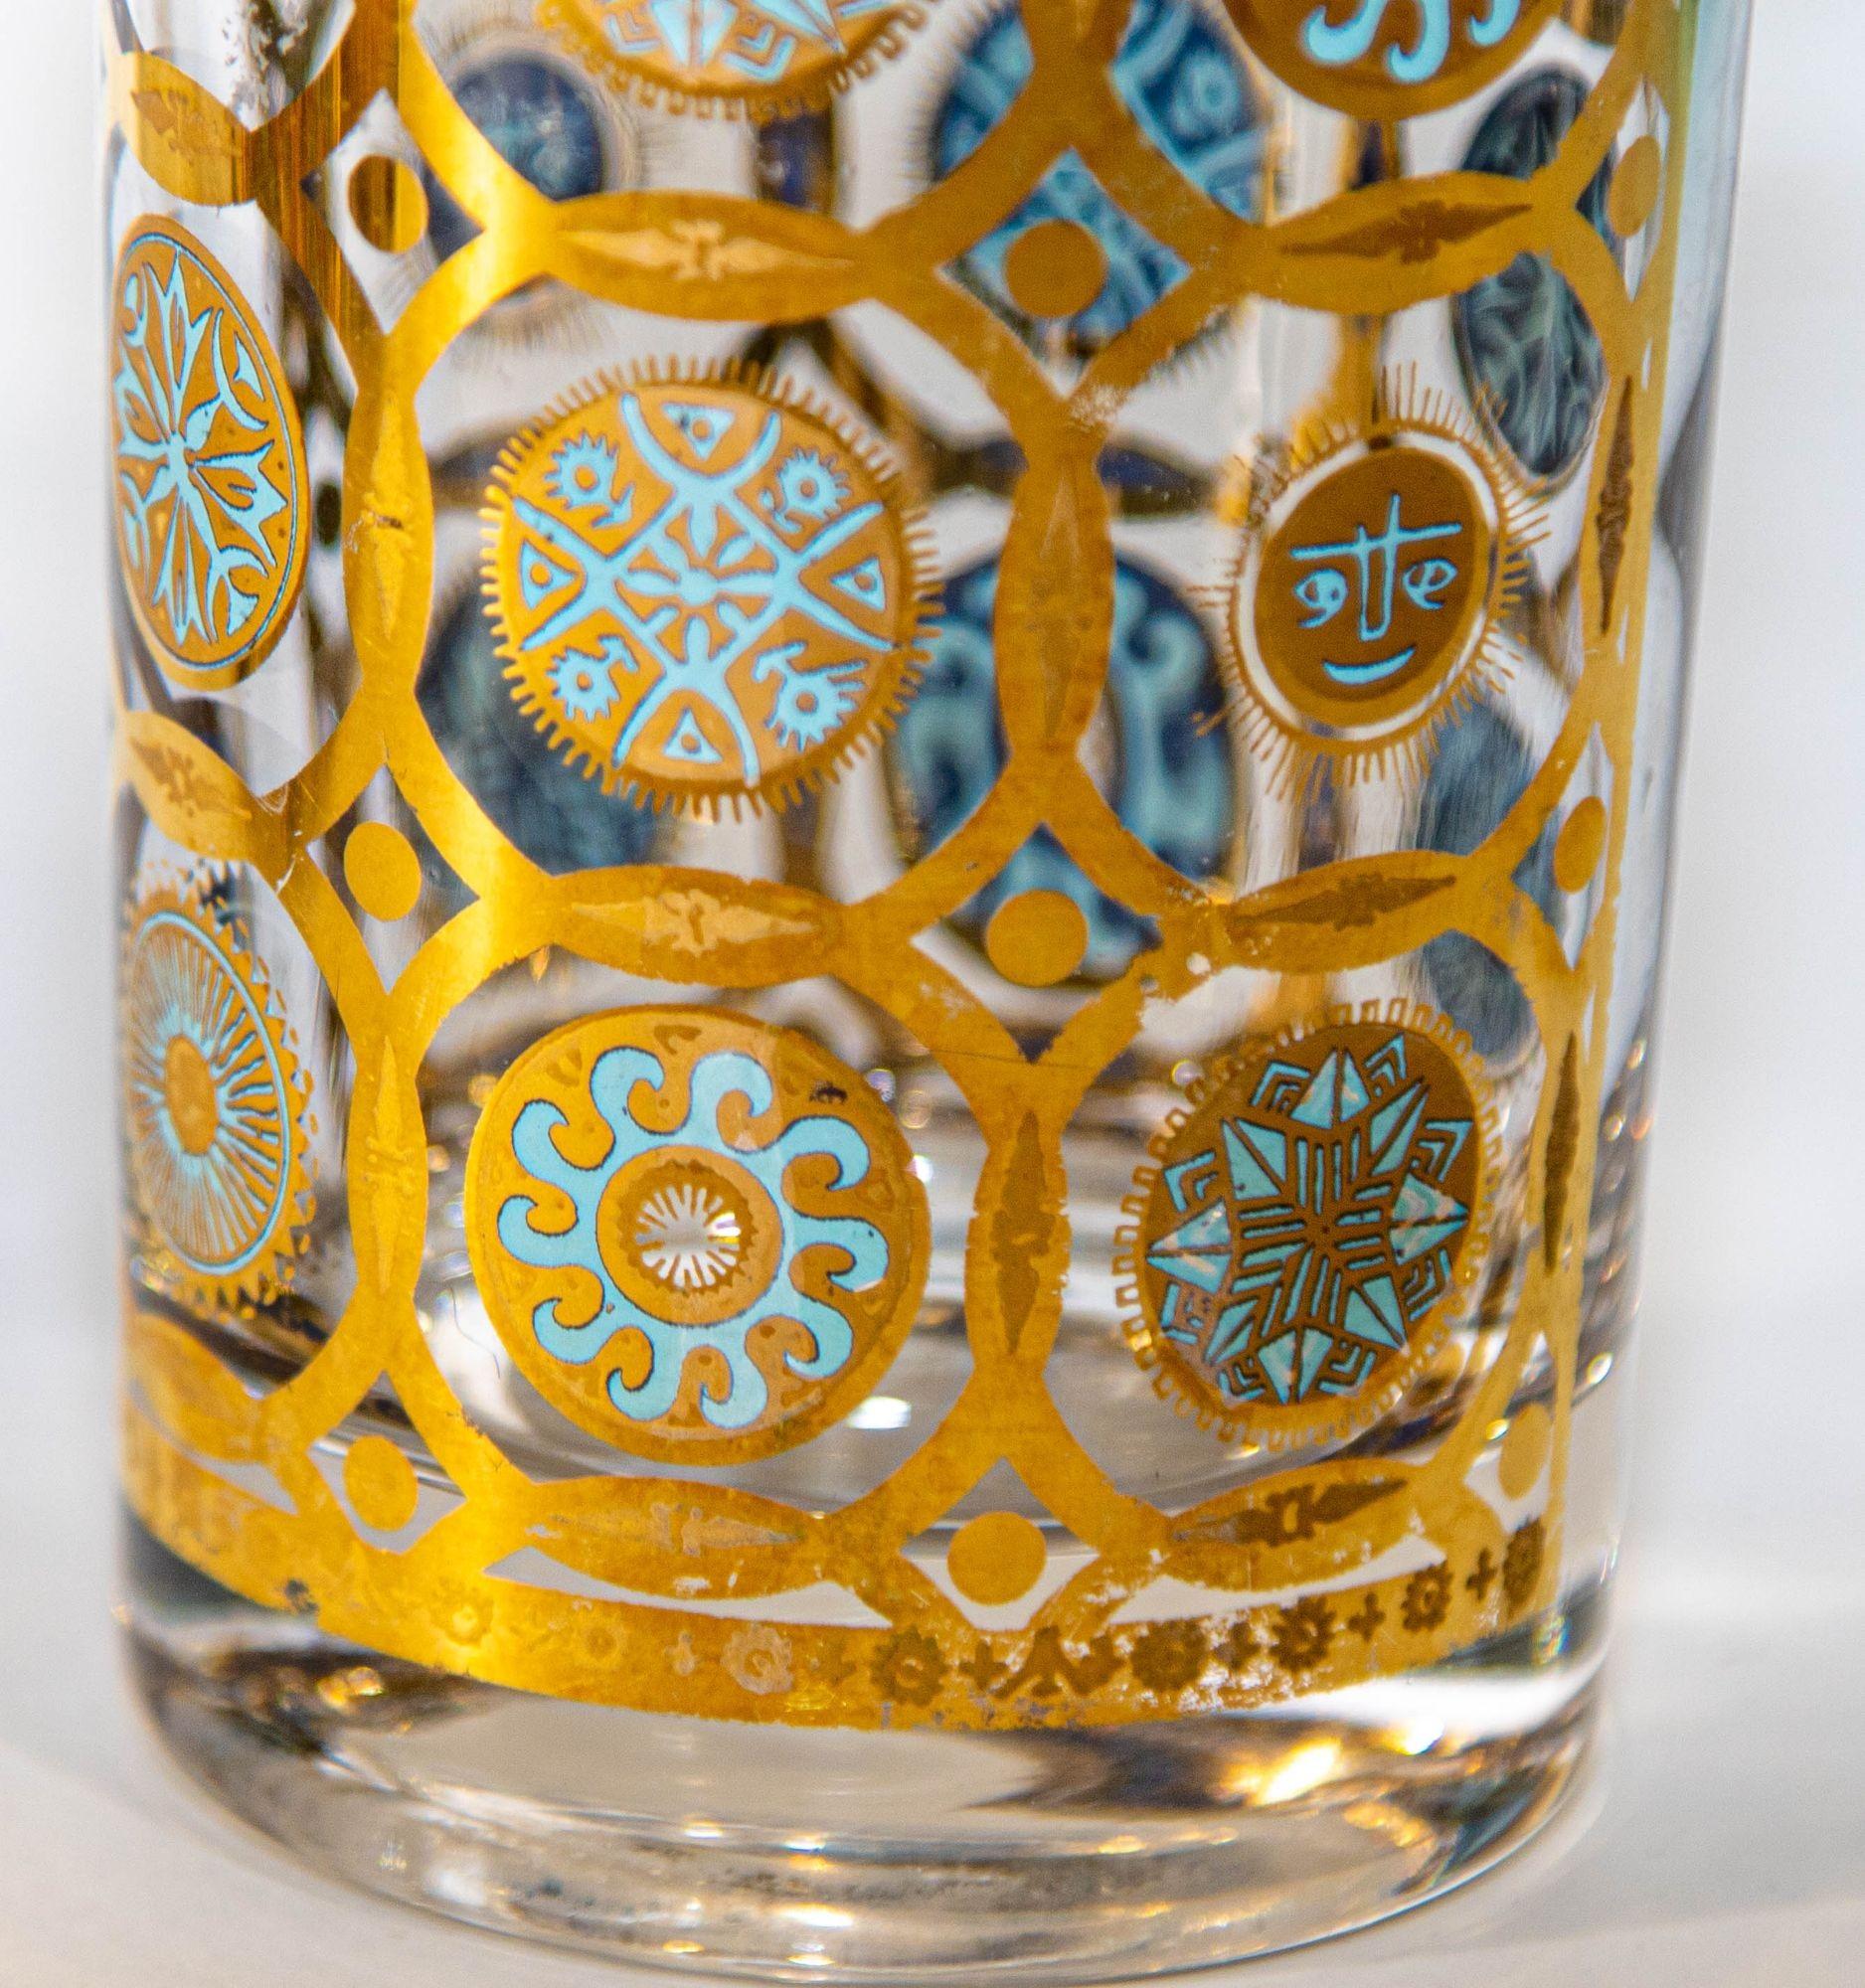 American Culver Ltd 22k Gold and Turquoise Signed Glassware Barware Set of 7, circa 1960s